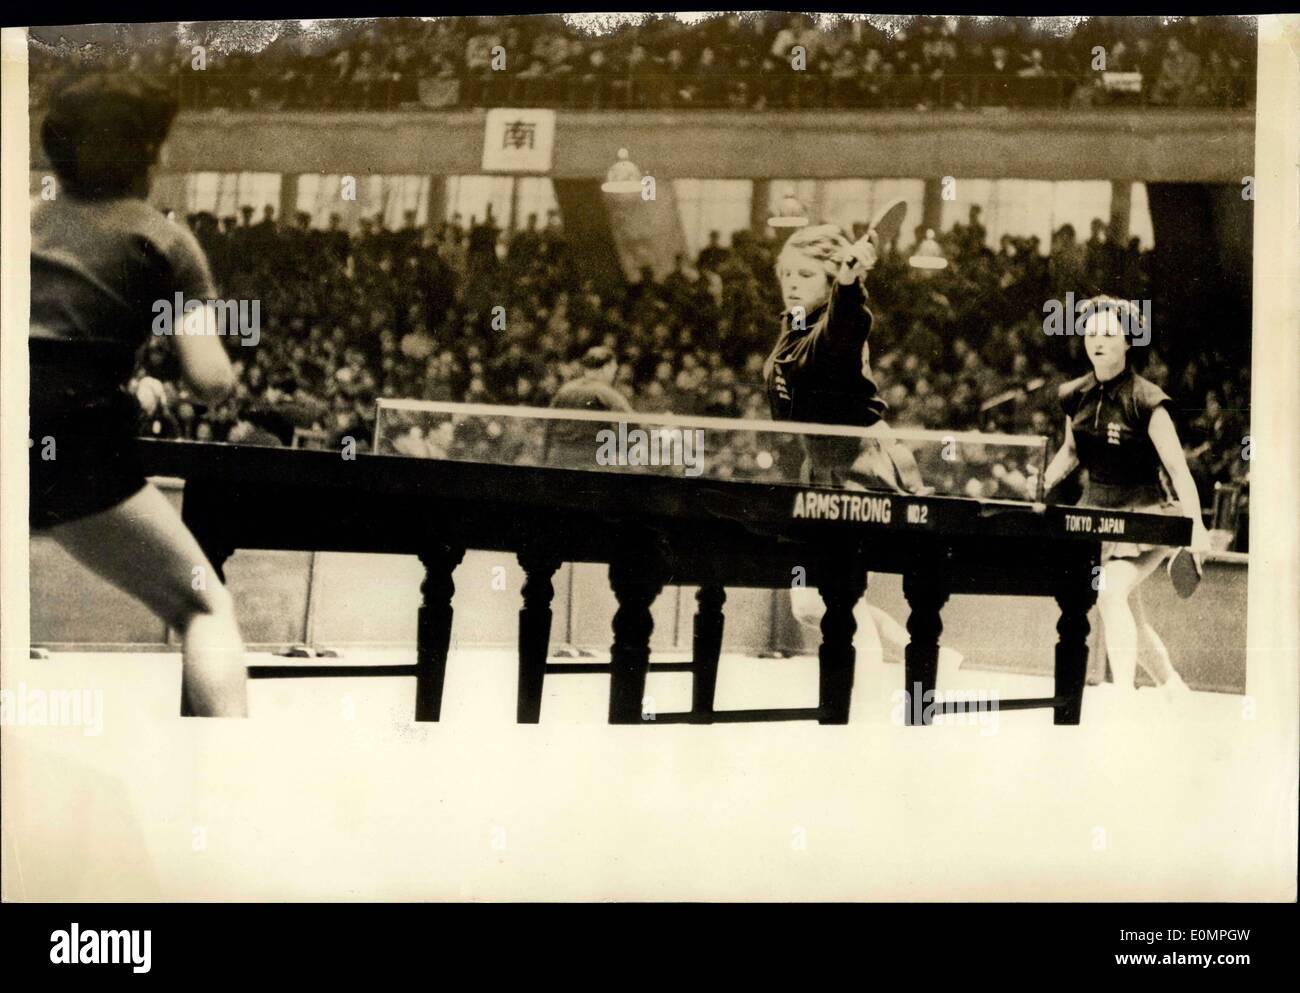 Apr. 07, 1956 - Table Tennis Championships In Tokio. Photo Shows:- the England Table Tennis Stars, Ann Haydon, and Diane Rowe, on right - Seen during their match against the Hongkong opponents, Miss Chang Yee CHing and Miss Baguio Wono, Which the English girls, won - during the World Table Tennis Championships in Tokio. Stock Photo